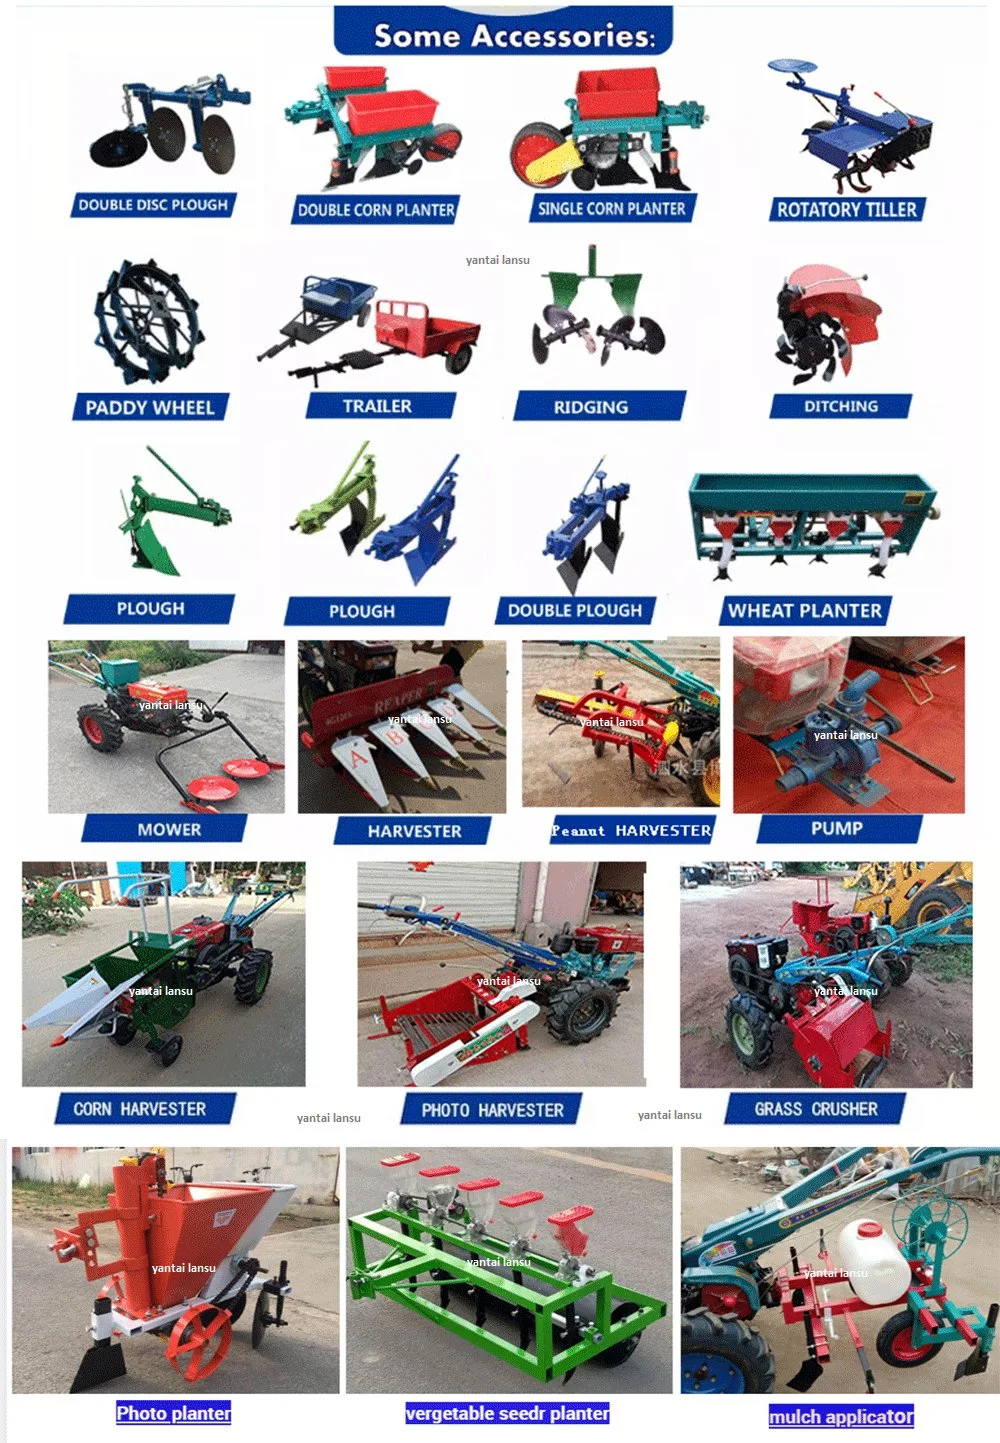 China Hot Sale Tractor Farm Machine Tractor with Front Loader